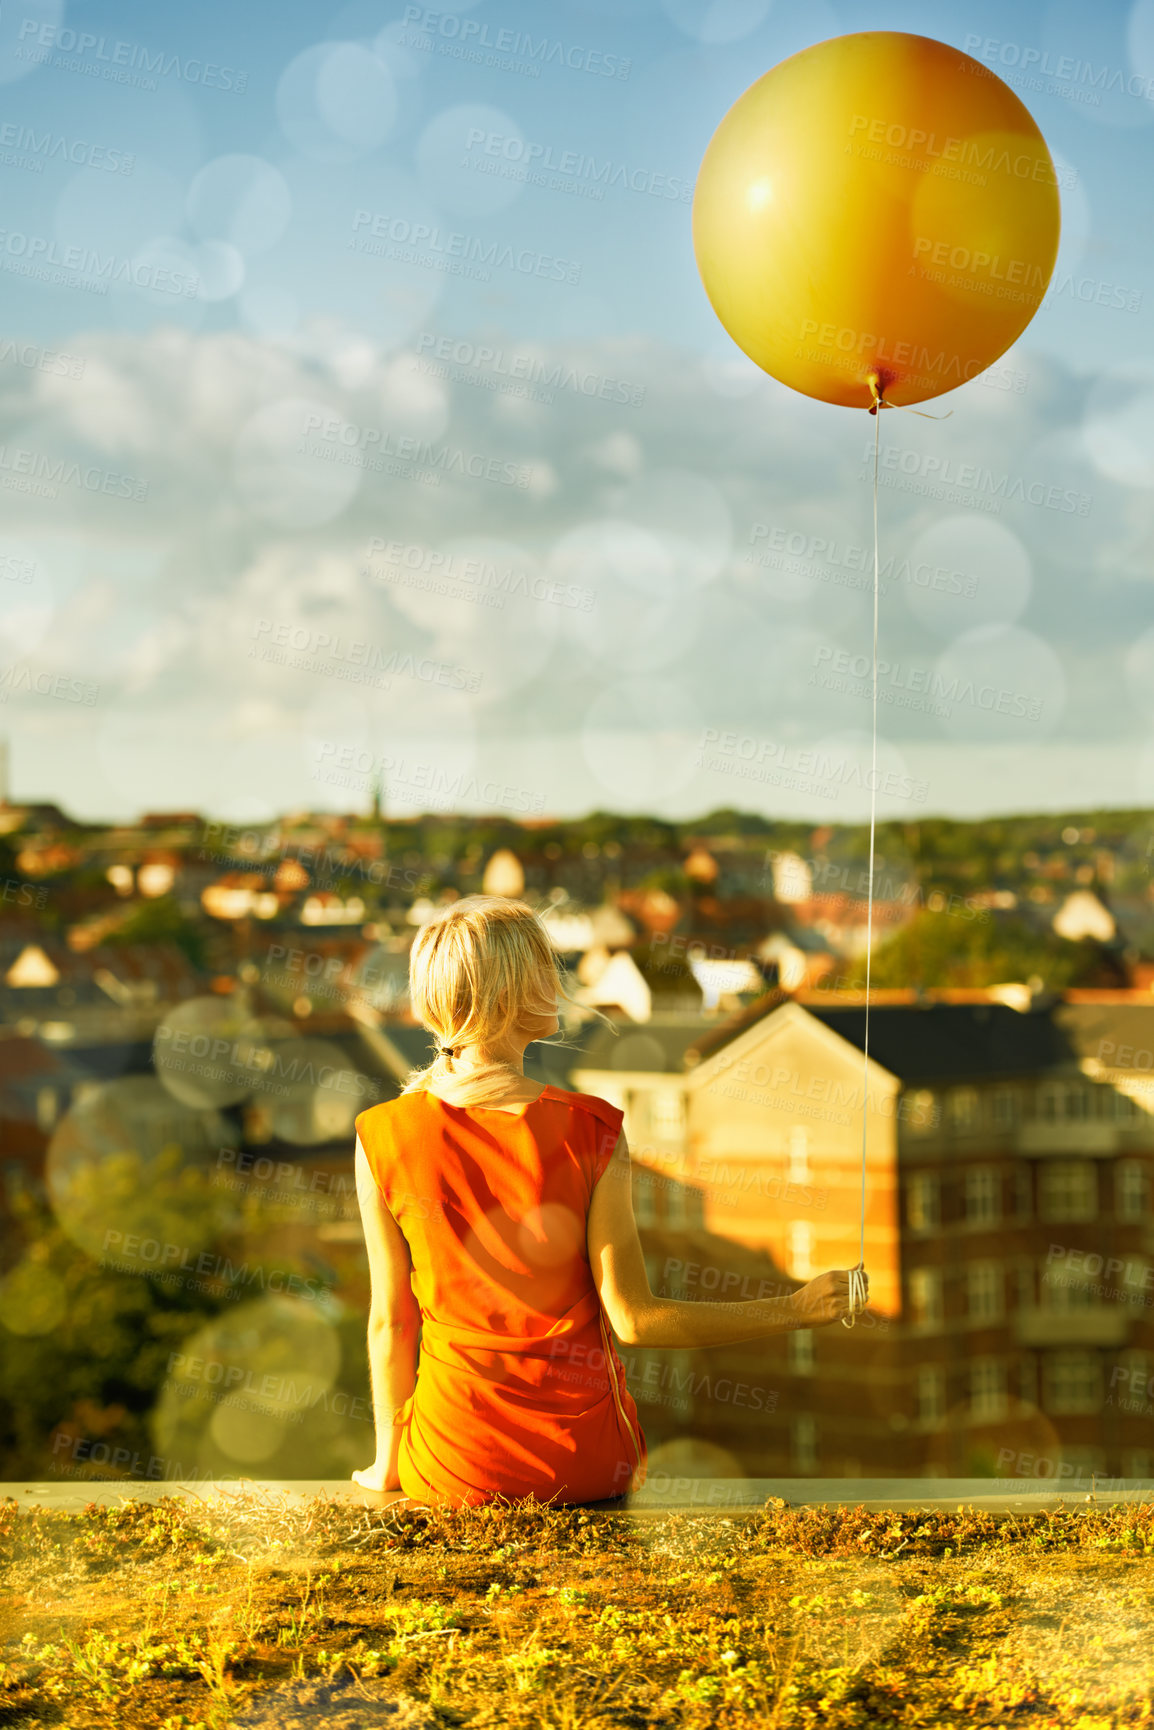 Buy stock photo Rear view of a young woman sitting with a balloon and a city in the background